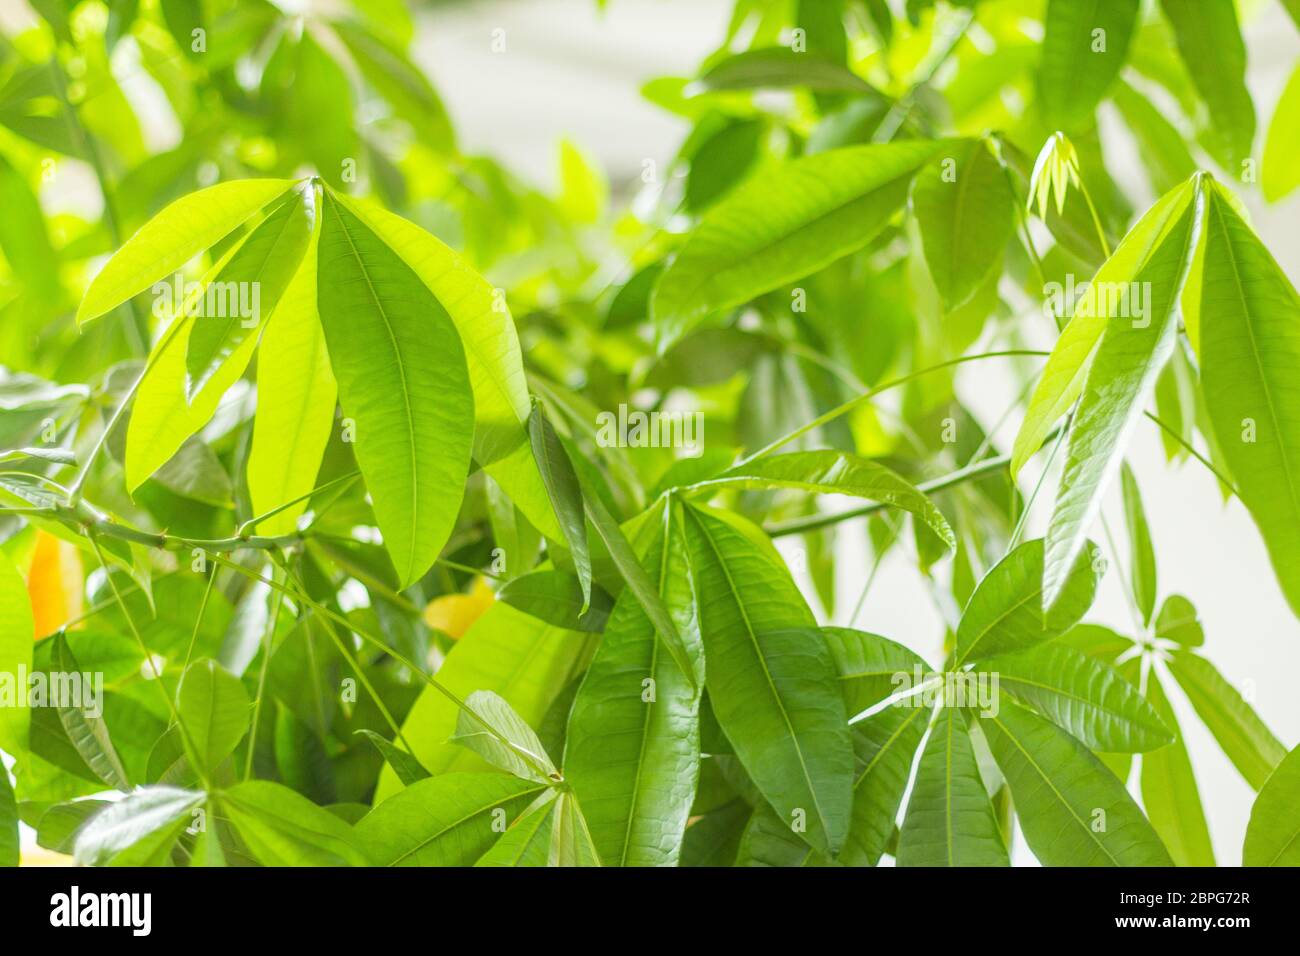 Money tree Pachira aquatica with leaves in a strong green shade symbol of luck wealth money tree care vitality fresh cosmetic Stock Photo